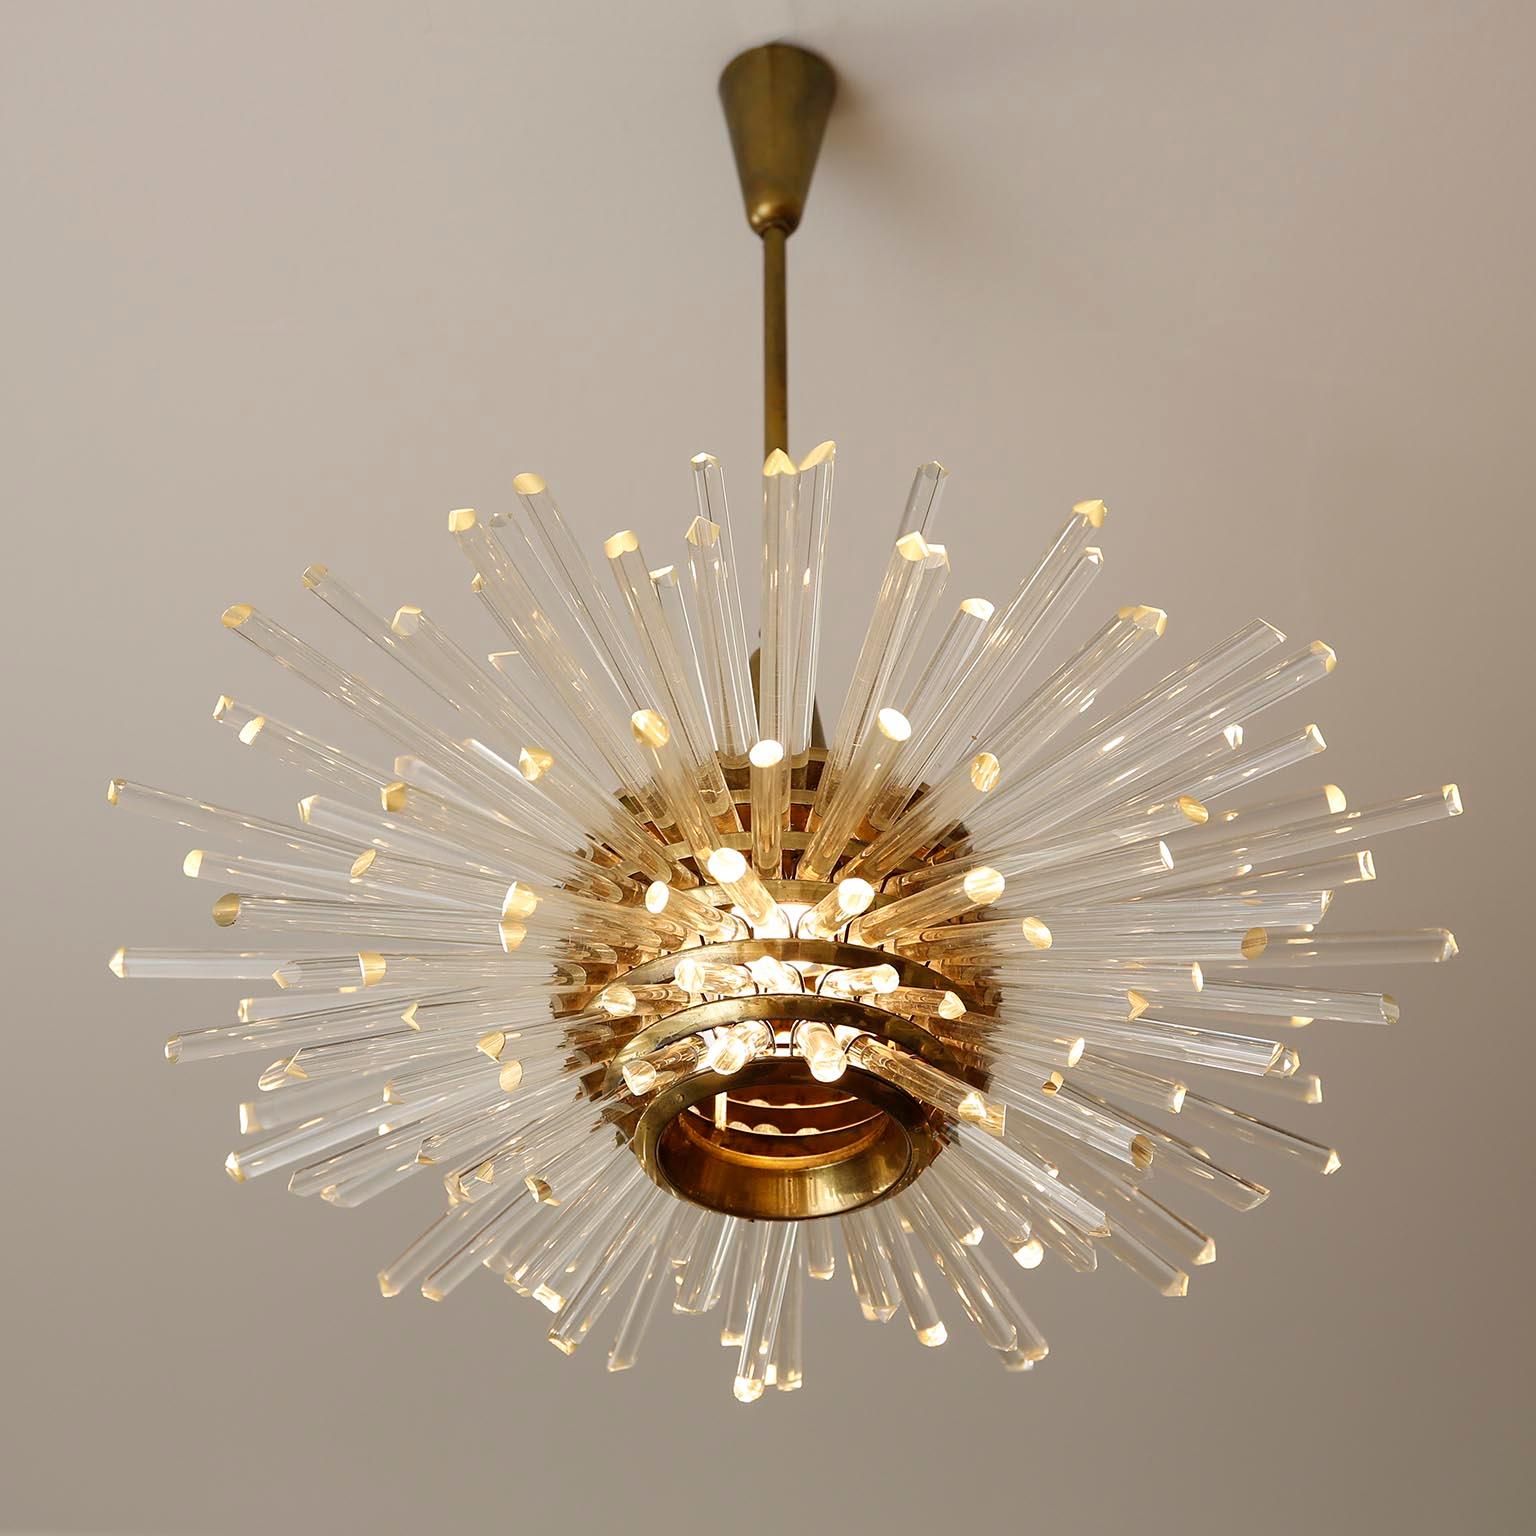 Pair of 'Miracle' Sputnik Chandeliers by Bakalowits, Brass Glass Rods, 1960s (Messing)